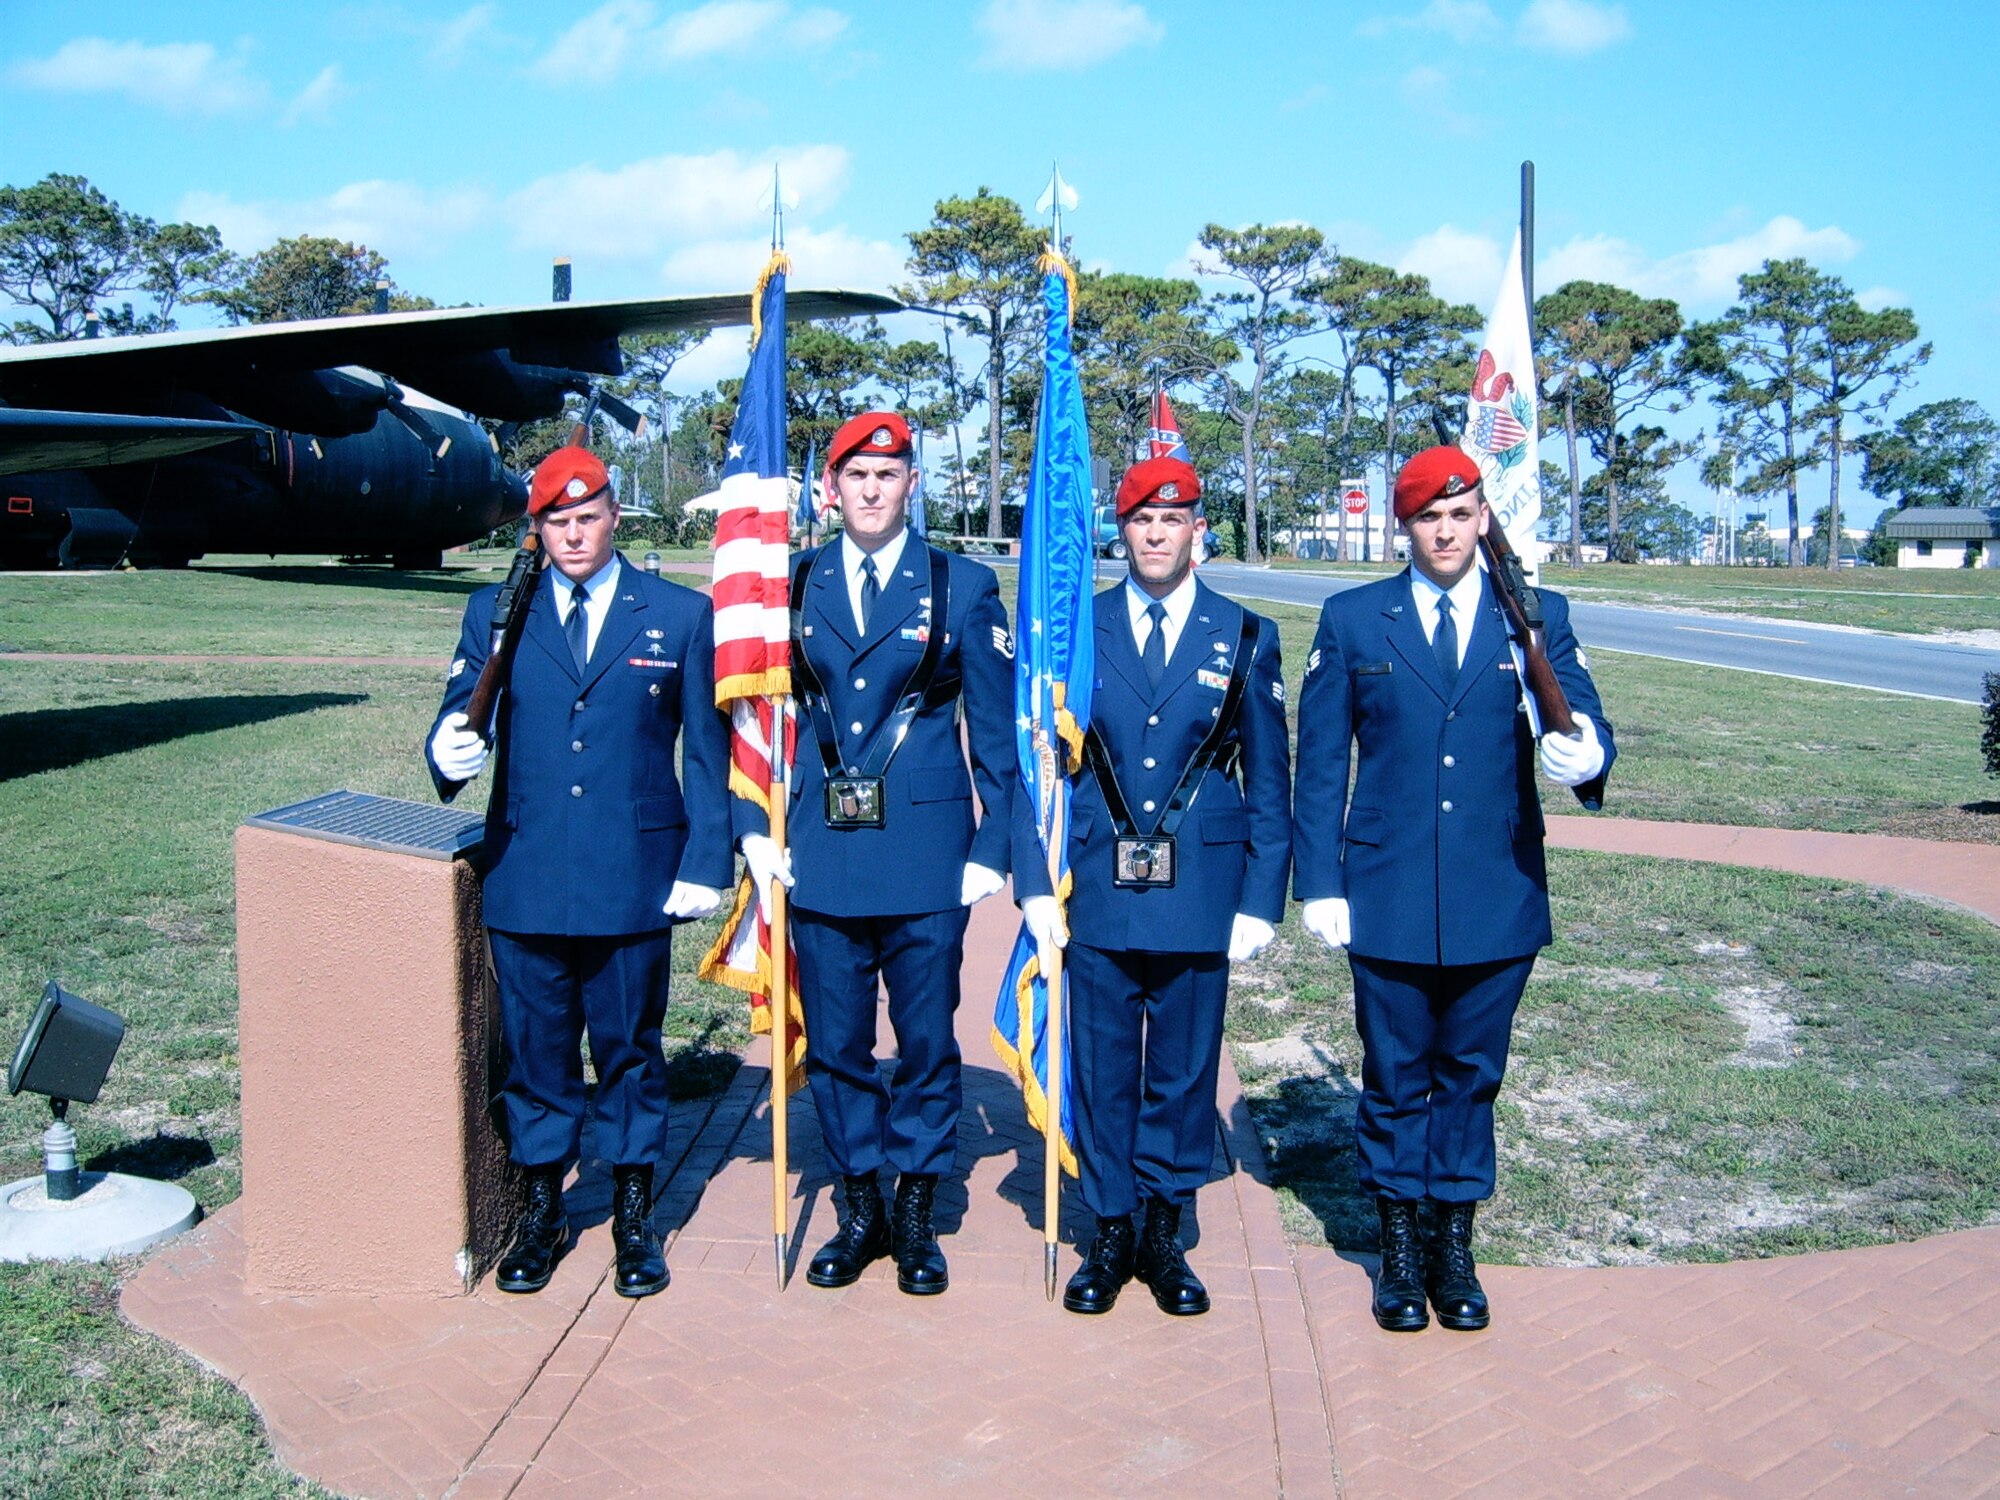 Staff Sgt. Timothy P. Davis (second from left) served as a member of the honor guard during a ceremony held Nov 12, 2005. Sergeant Davis died of wounds suffered when his vehicle encountered an improvised explosive device Feb. 20 in Afghanistan. He was assigned to the 23rd Special Tactics Squadron at Hurlburt Field, Fla. (U.S. Air Force photo) 
